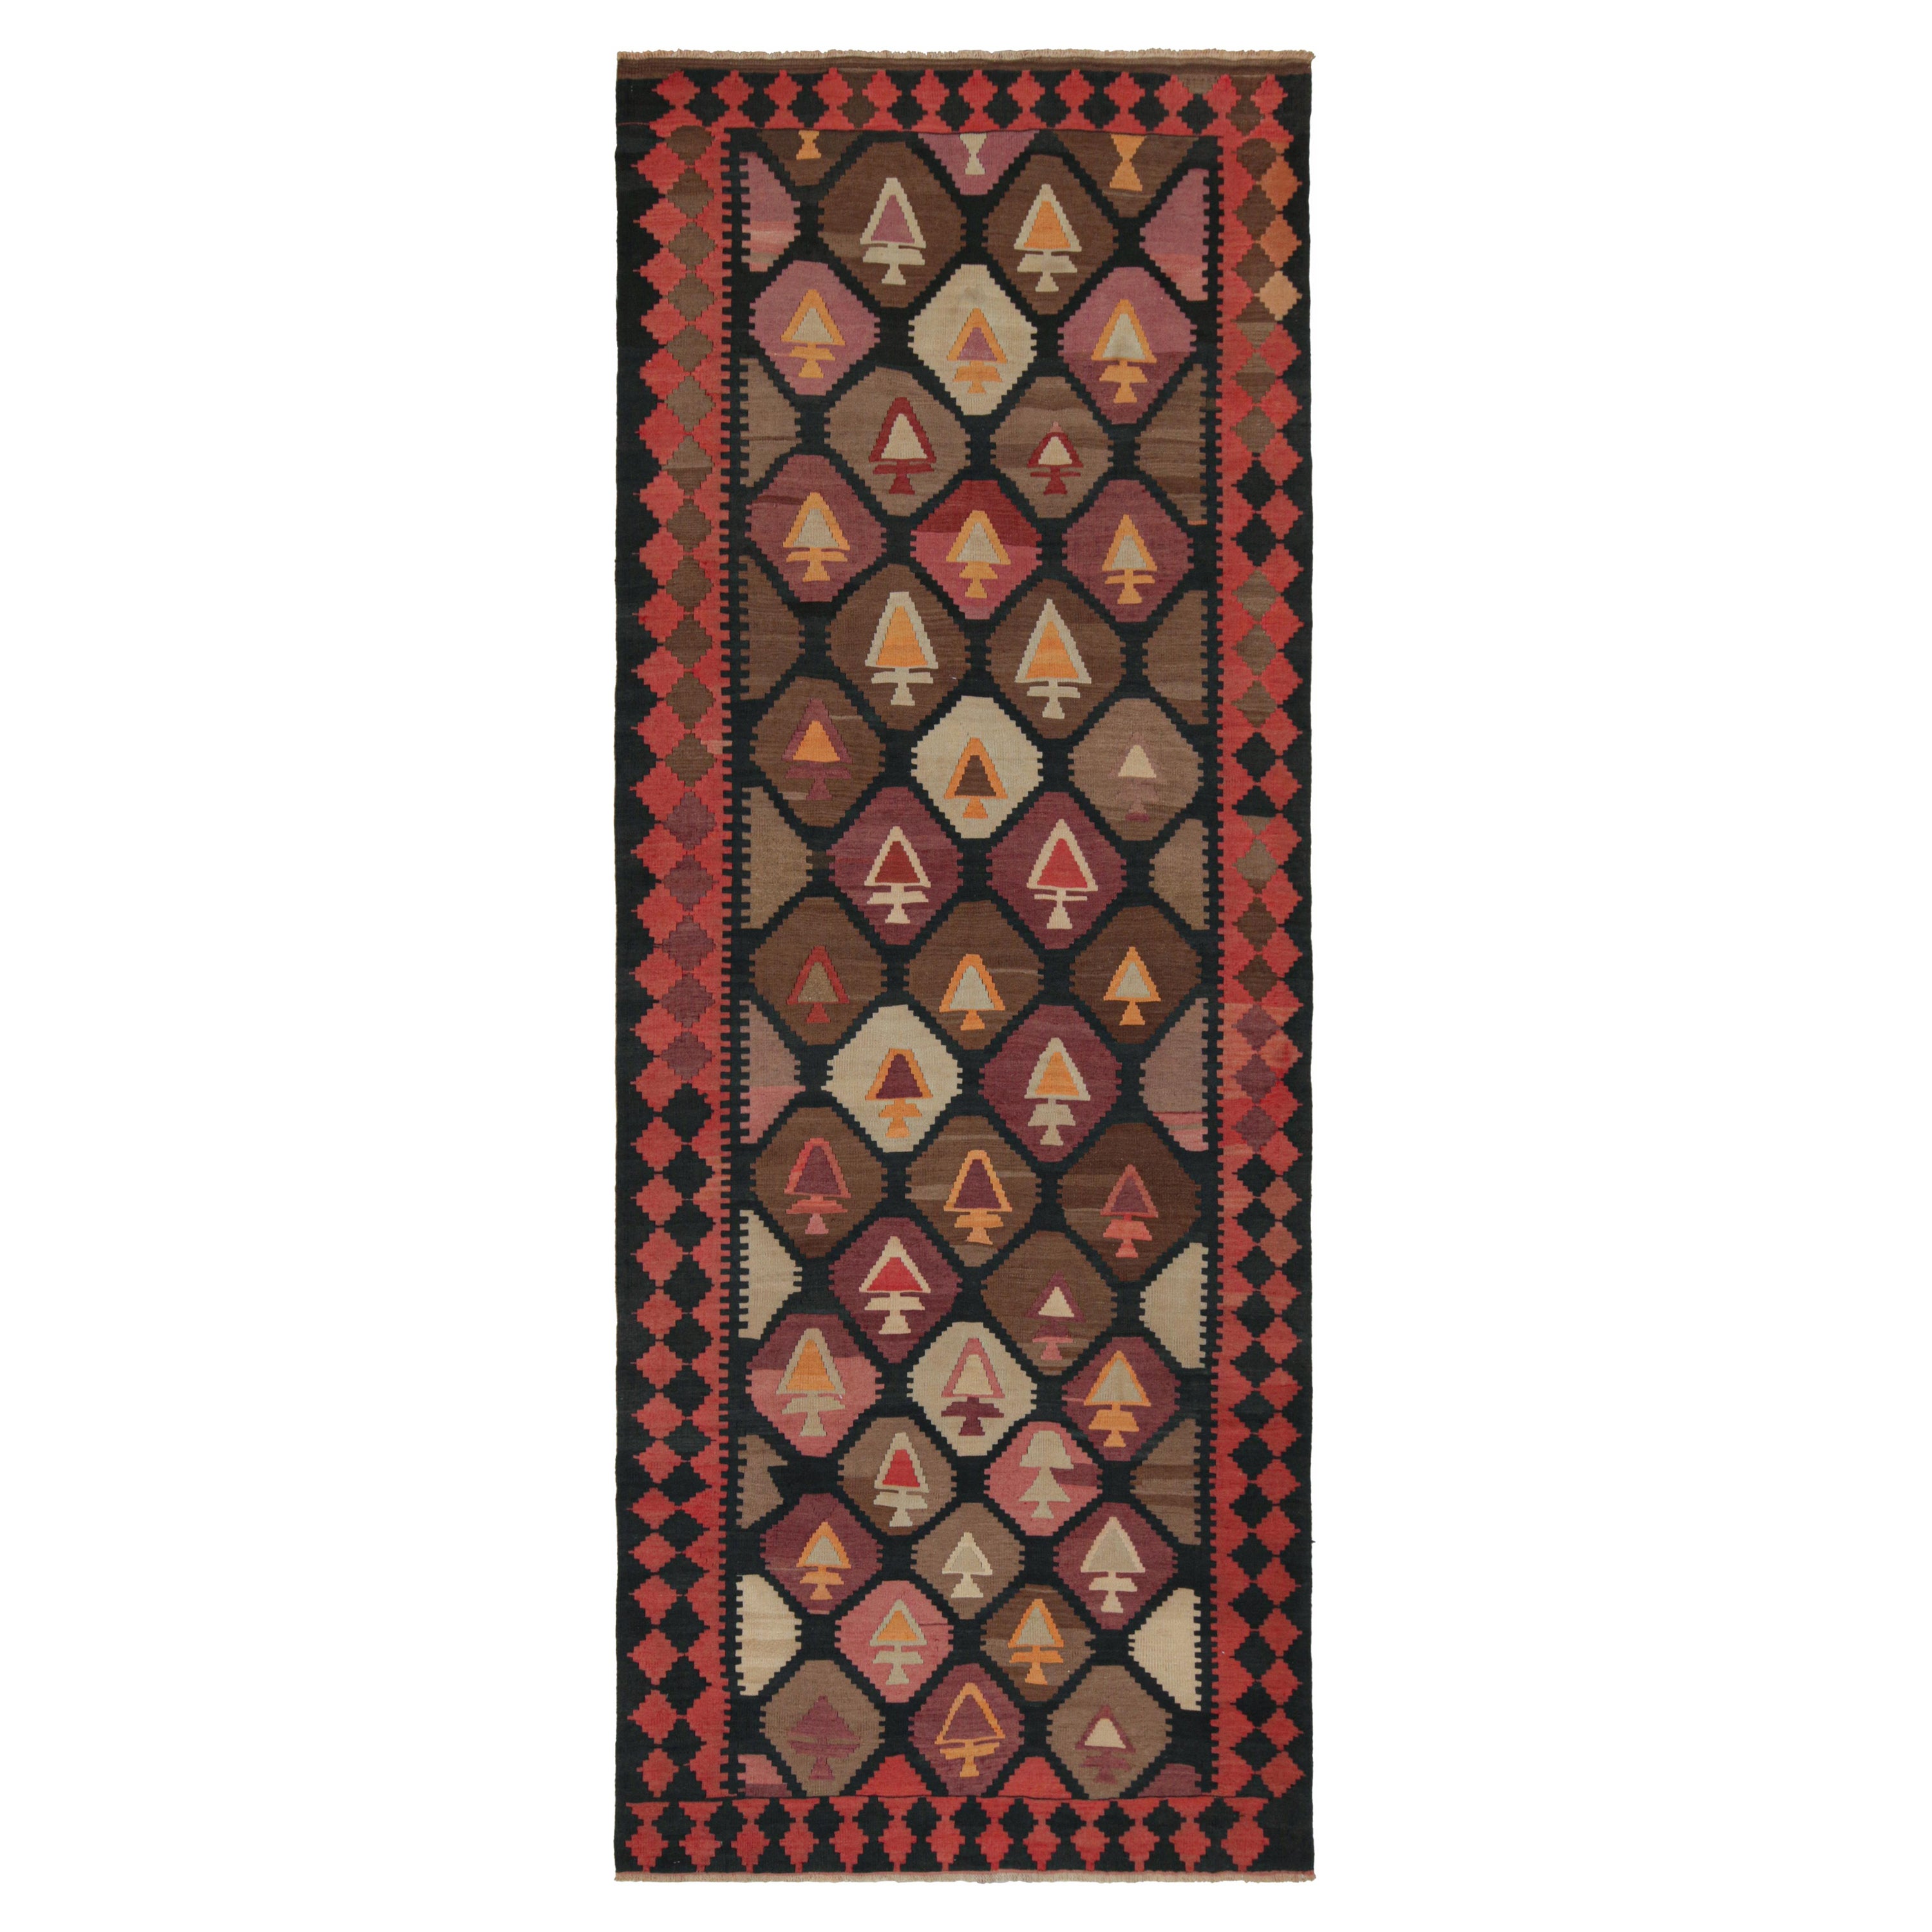 Vintage Persian Kilim in Red, Black and Brown Geometric Patterns by Rug & Kilim For Sale